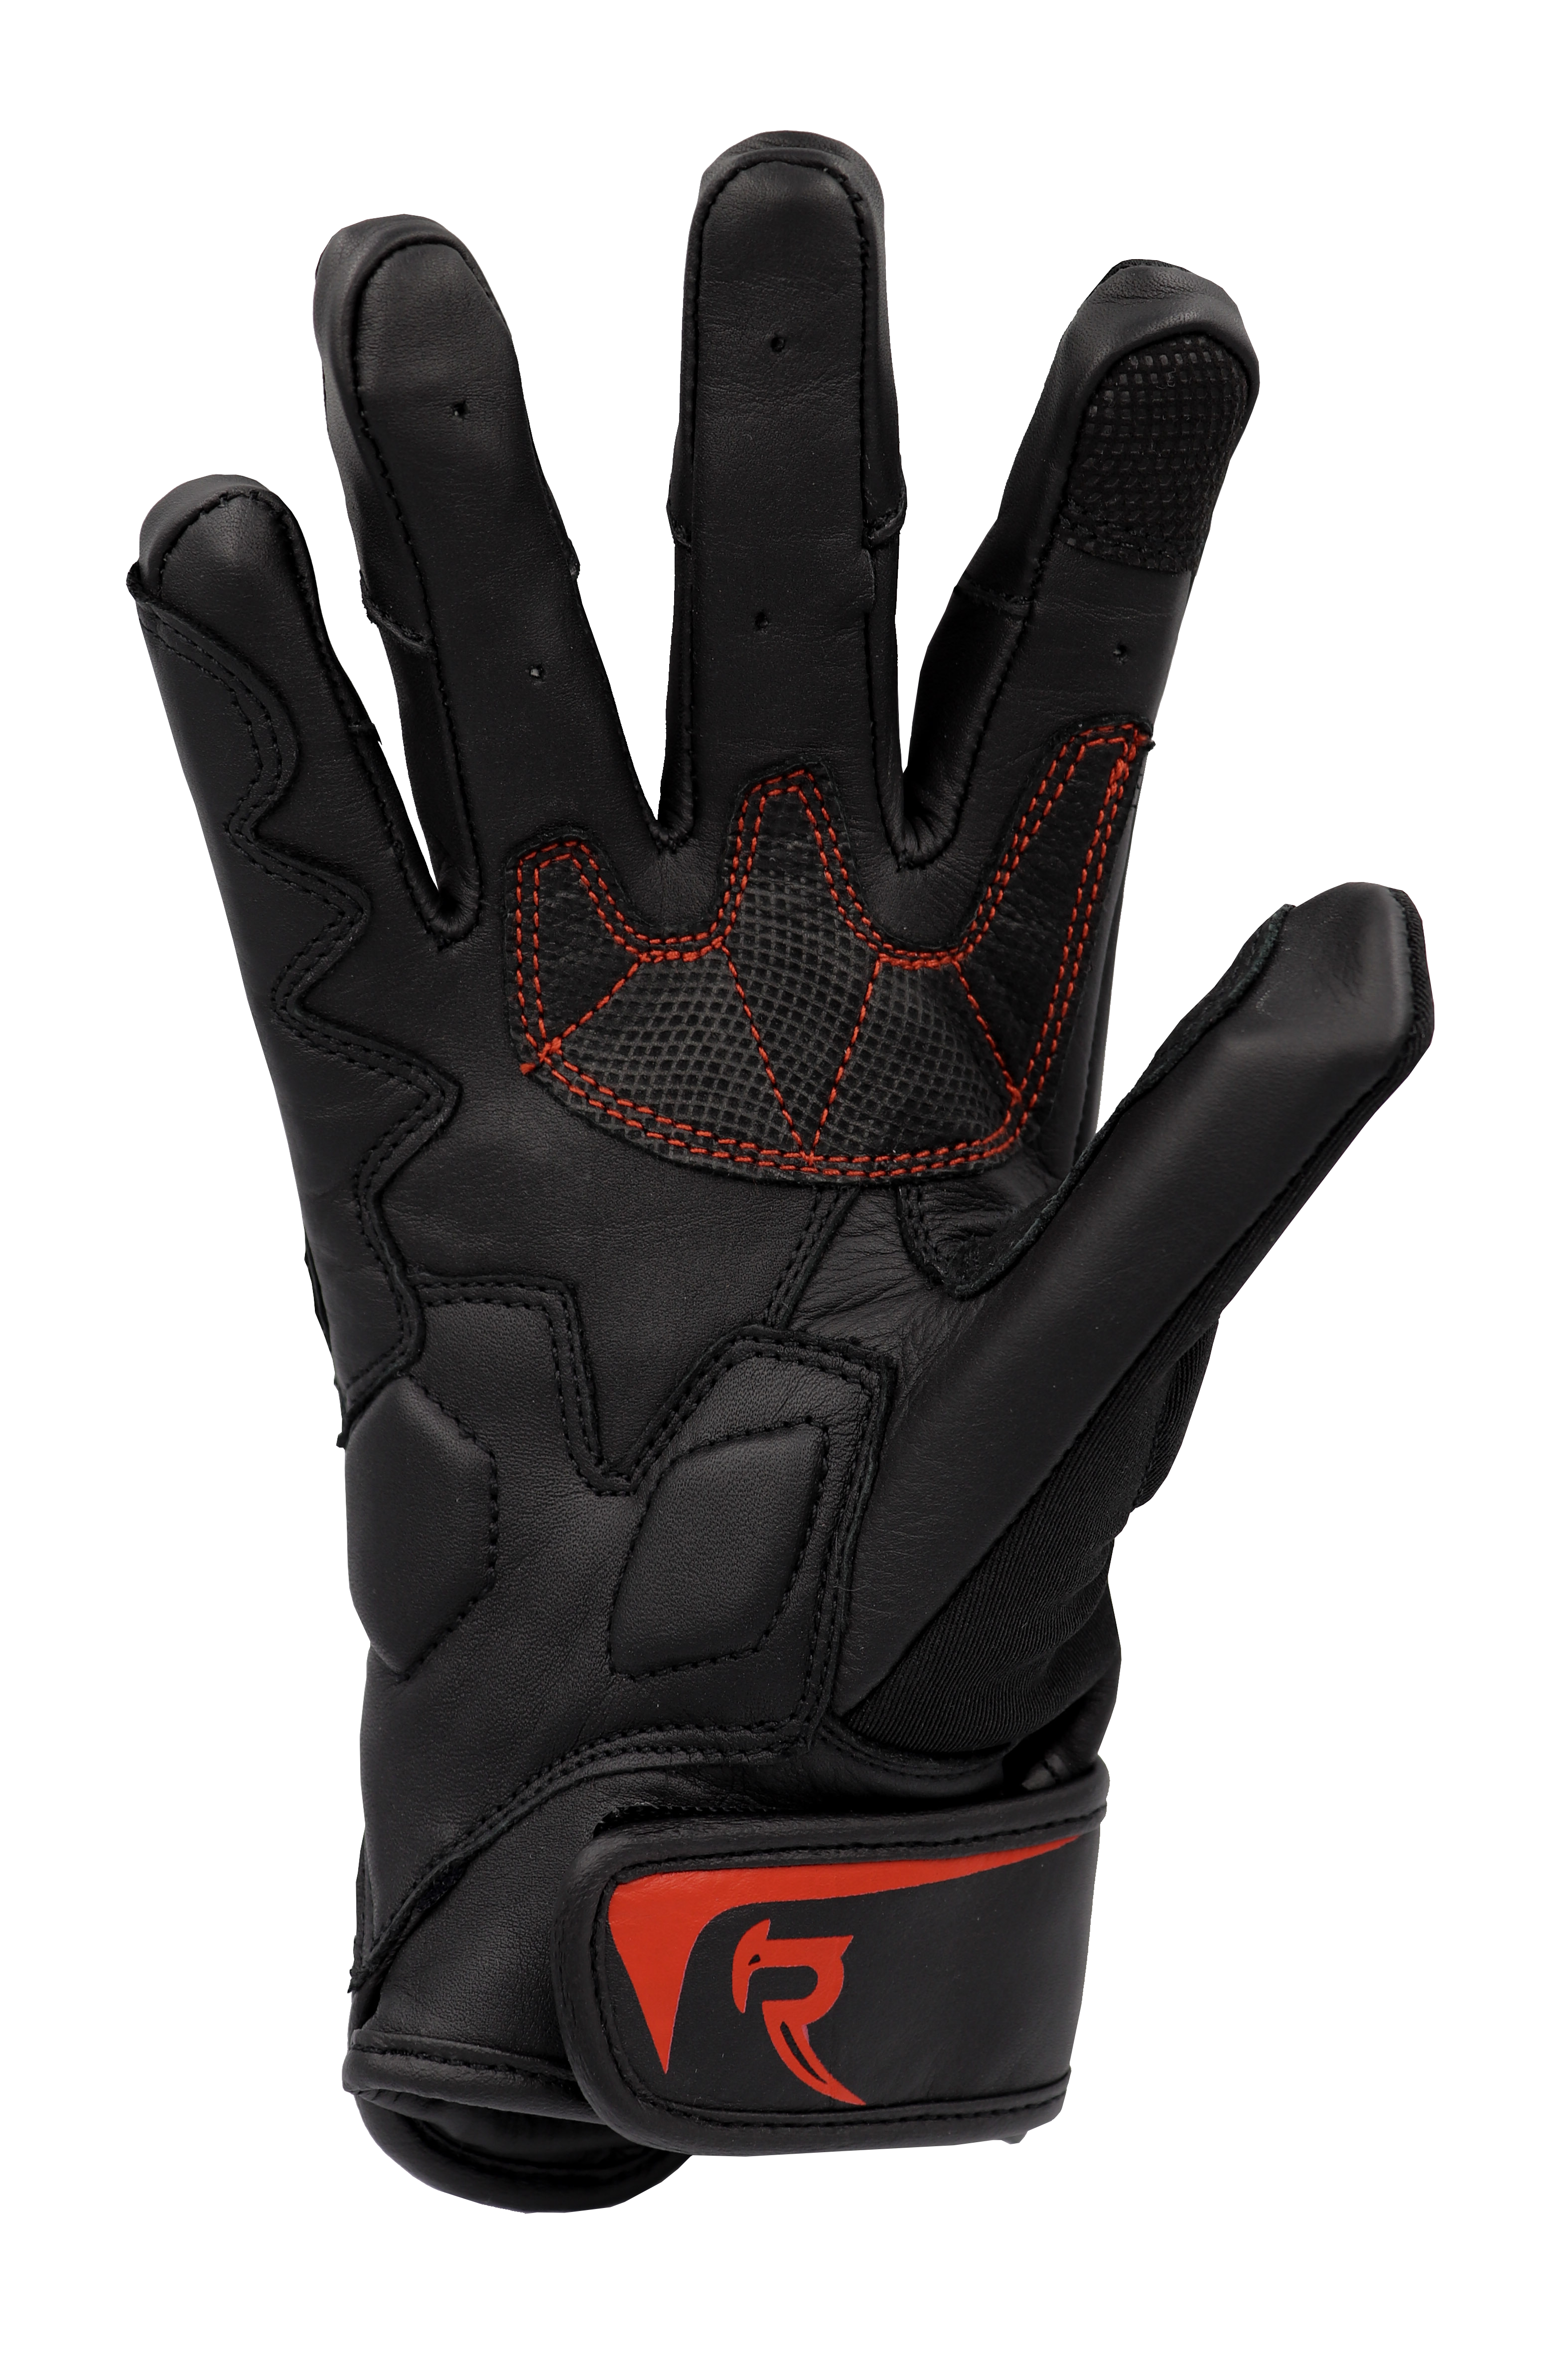 DIABLO - Black and Red Short Cuff Leather Motorcycle Glove by RAVEN Moto